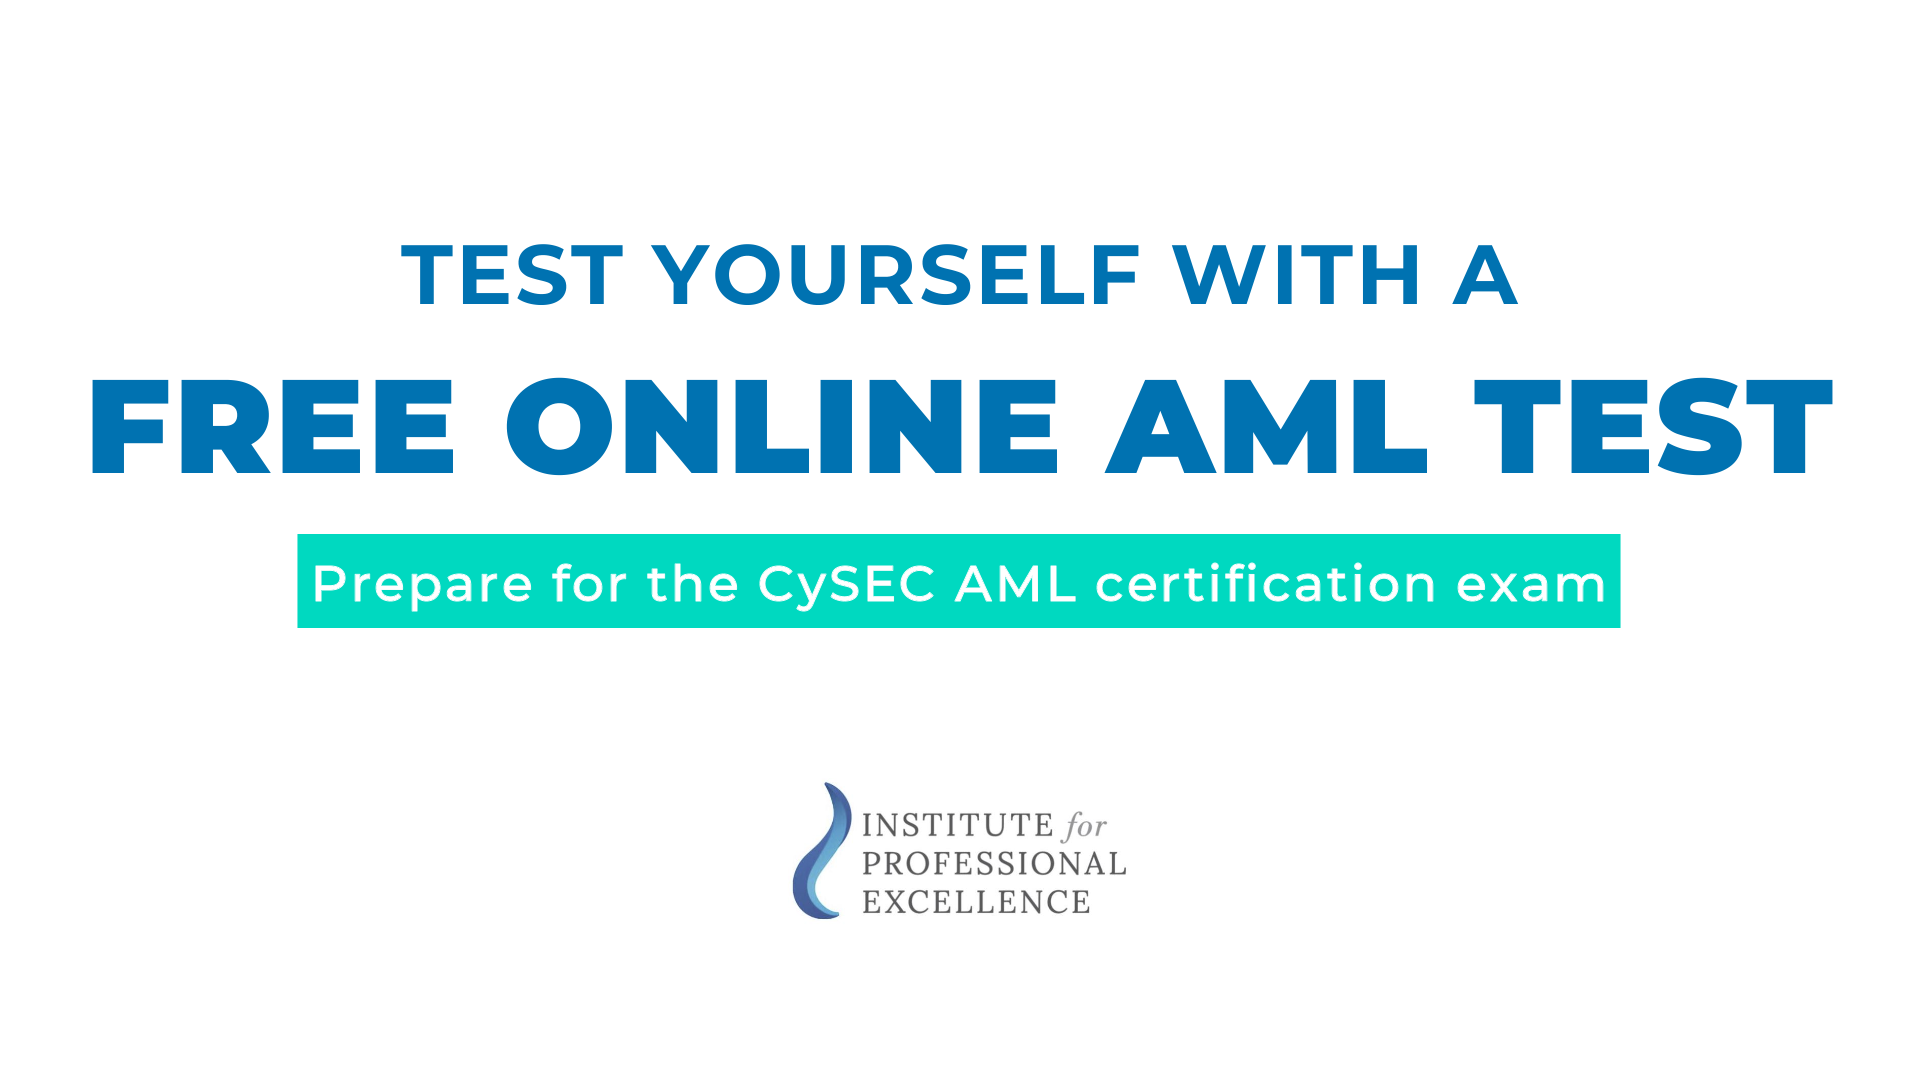 Free online antimoney laundering test prepare for the CySEC AML